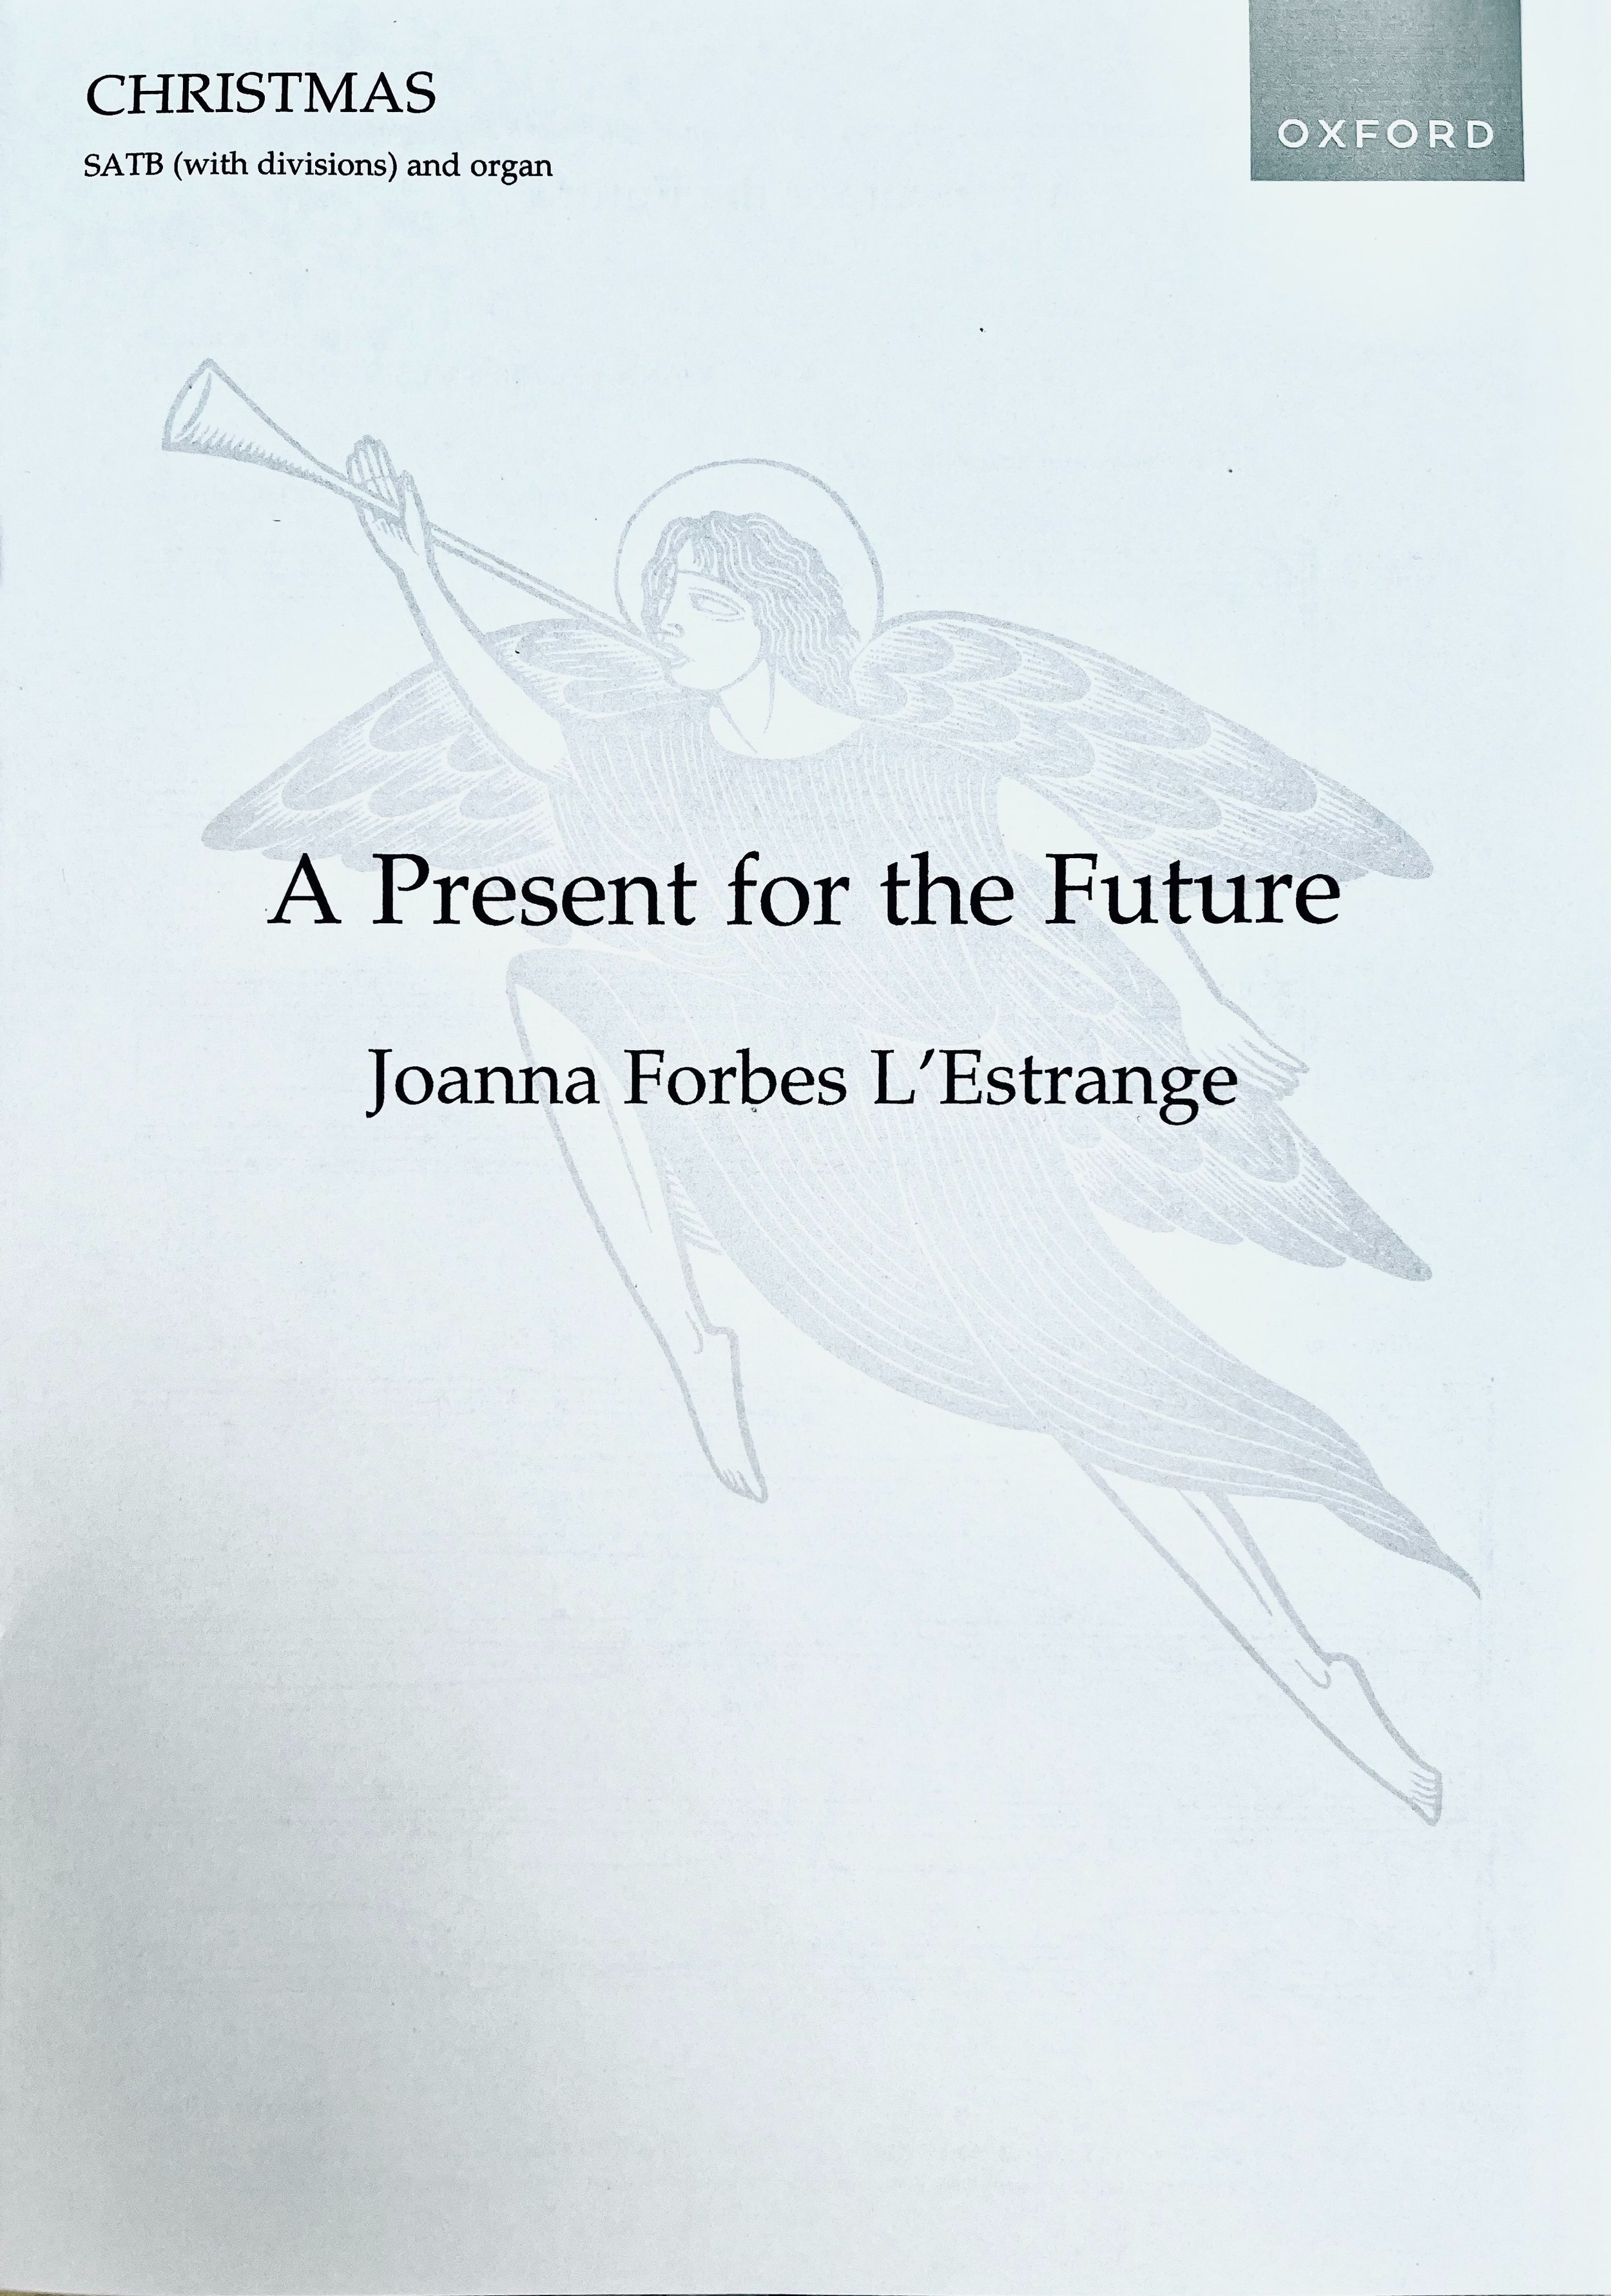 A Present for the Future by Joanna Forbes L'Estrange